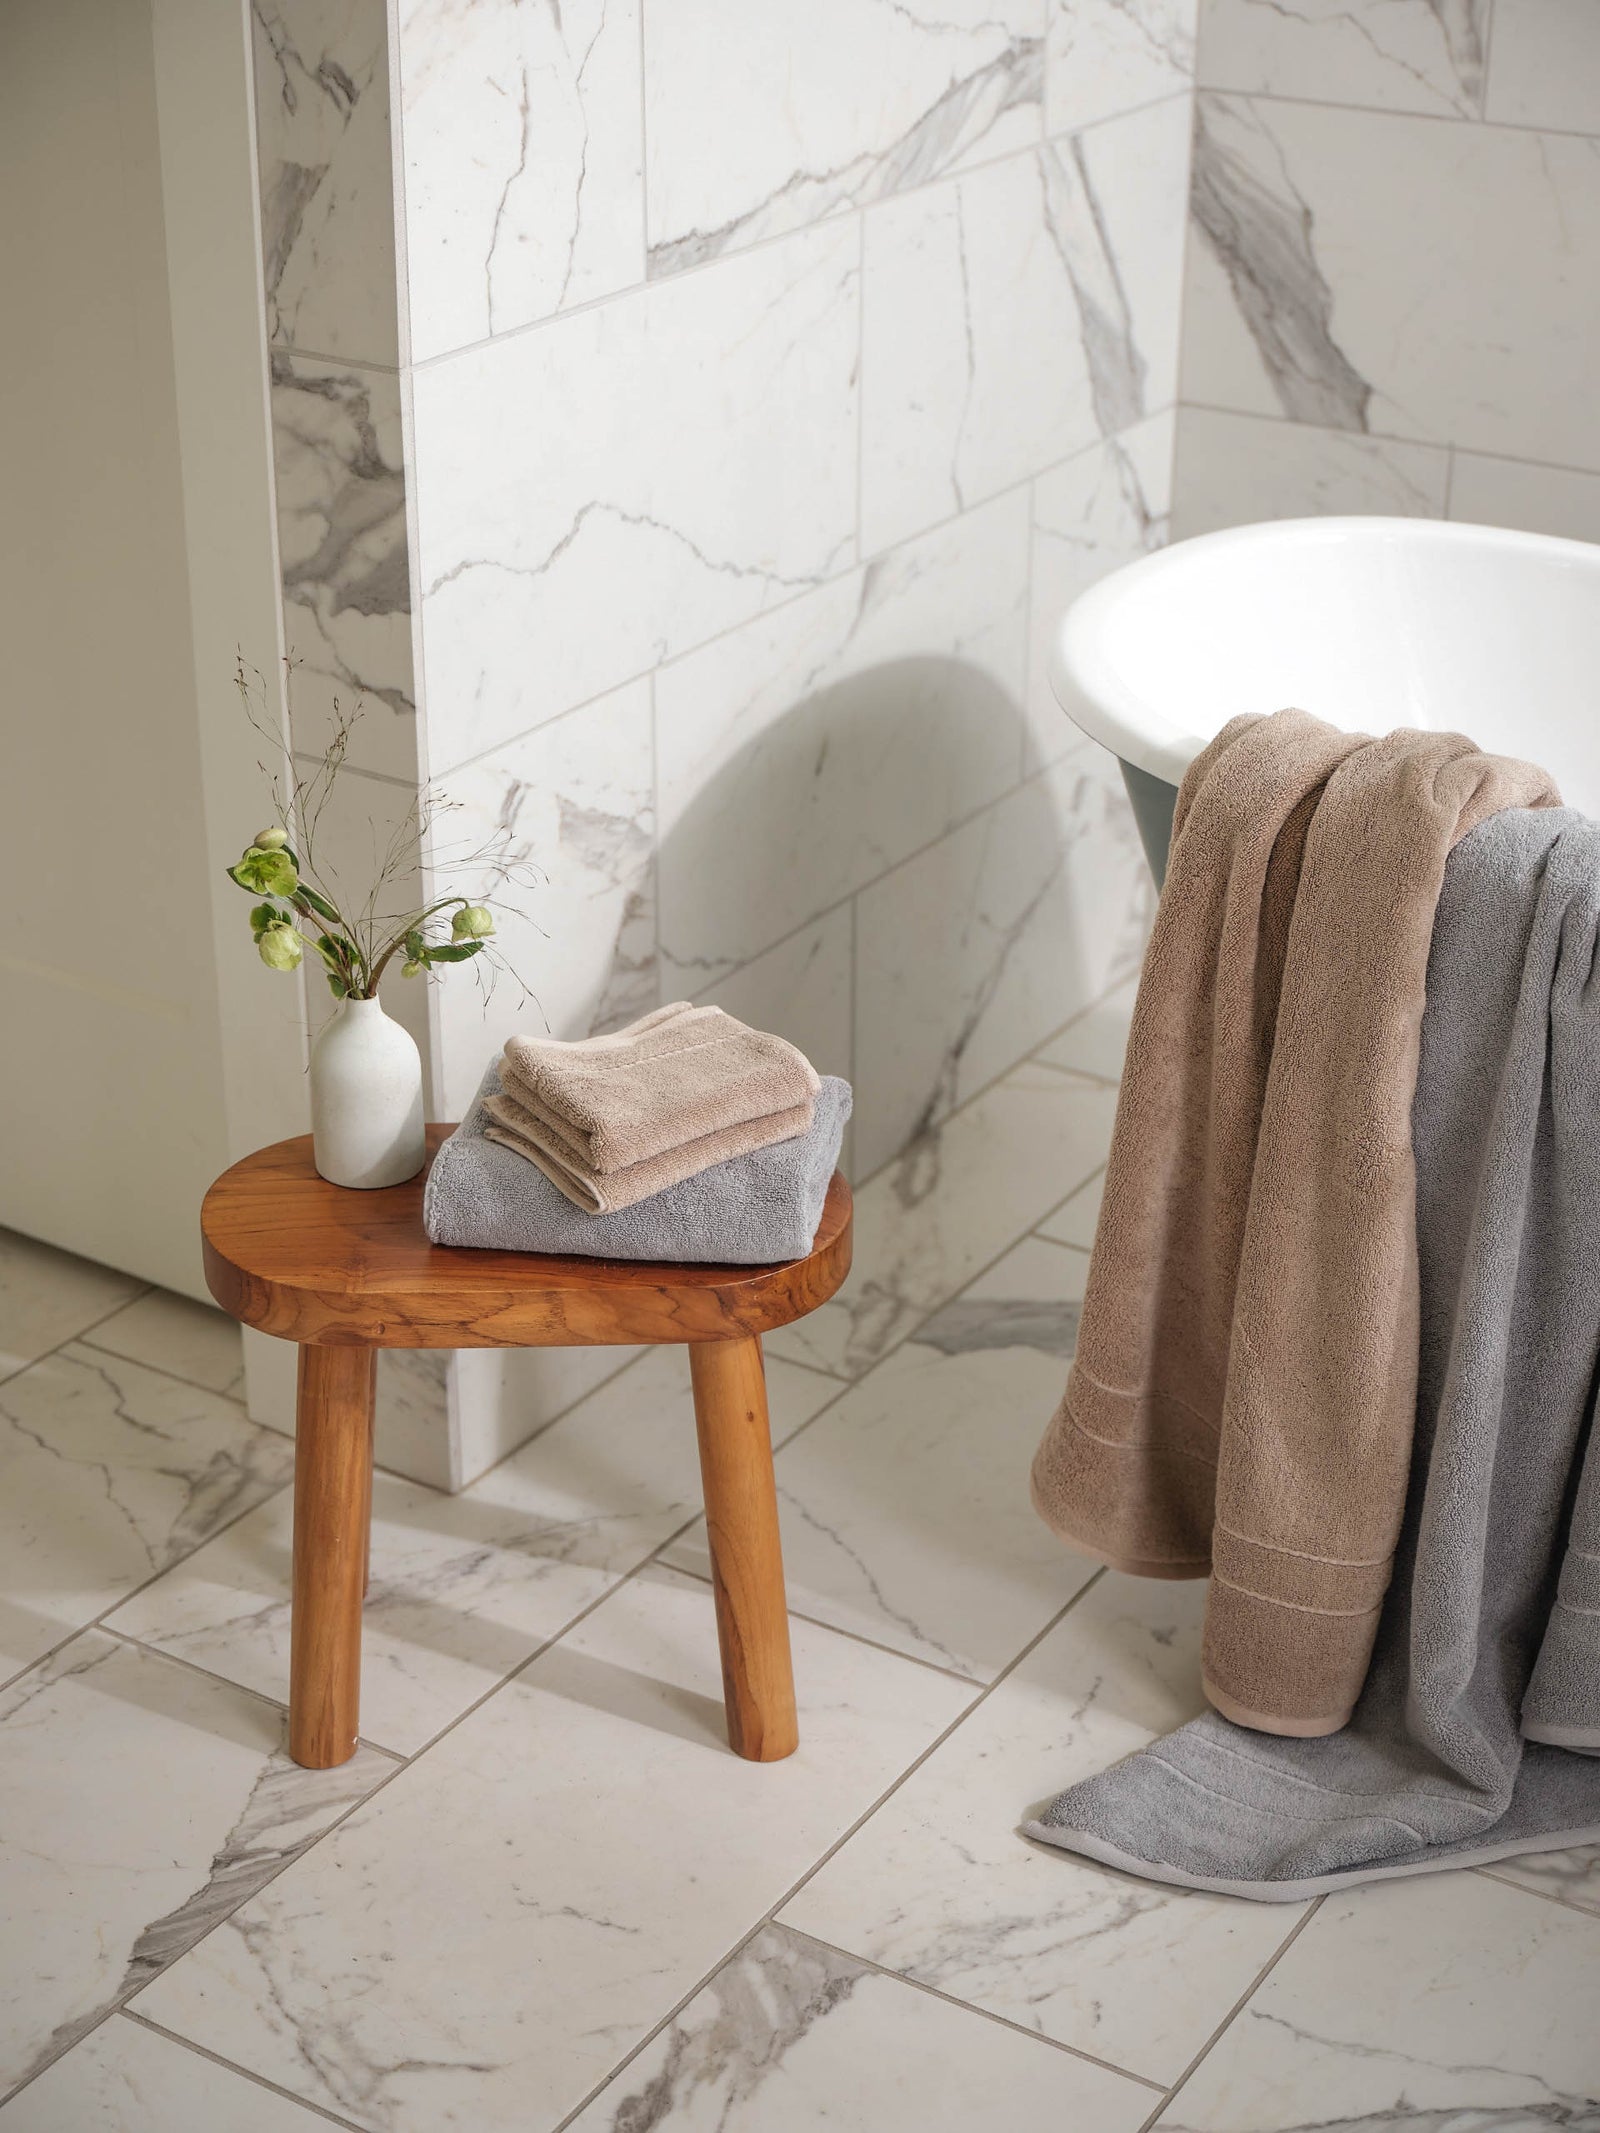 Premium Plush Hand Towels in the color Sand and Harbor Mist. Photo of Sand and Harbor Mist Premium Plush Hand Towels taken resting on a stool in a bathroom with marble tile. Sand and harbor mist premium plush bath sheets are draped over the bath tub that is in the bathroom.